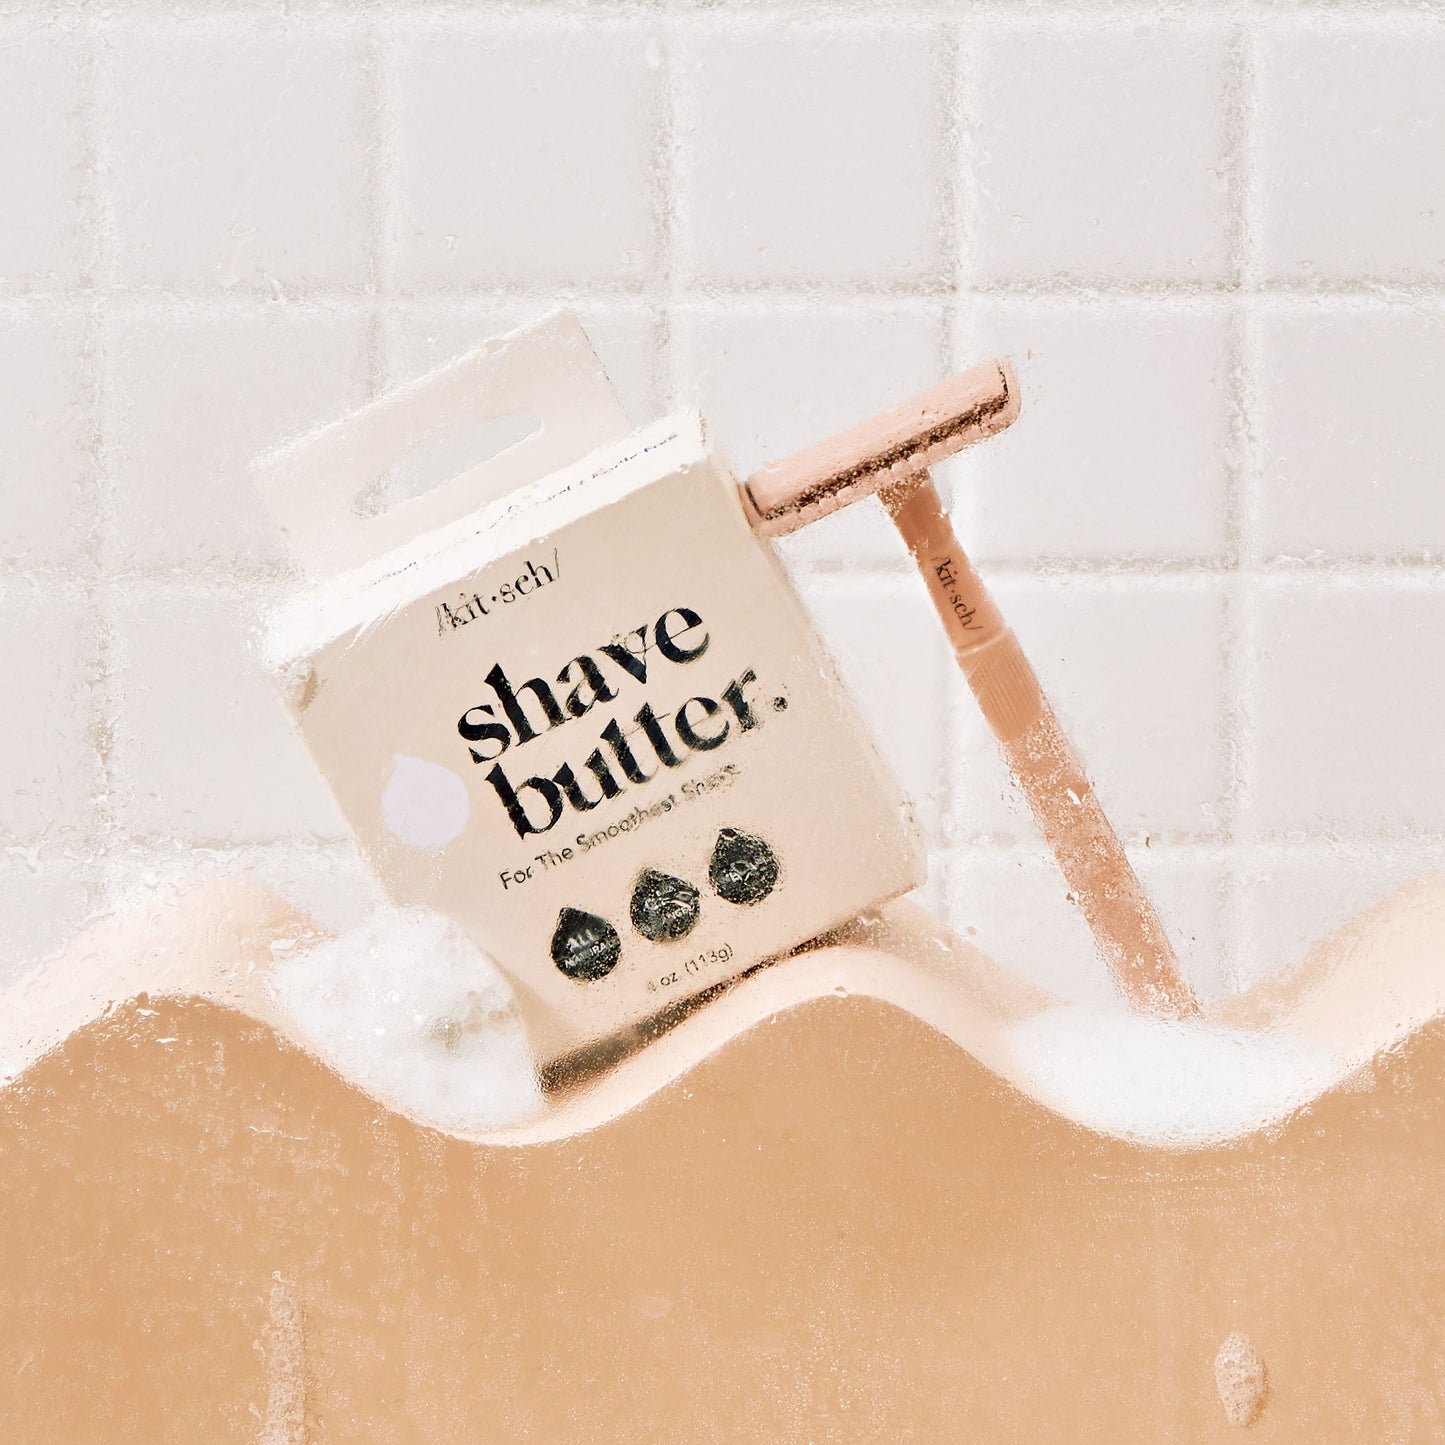 Kitsch Solid Shave Butter